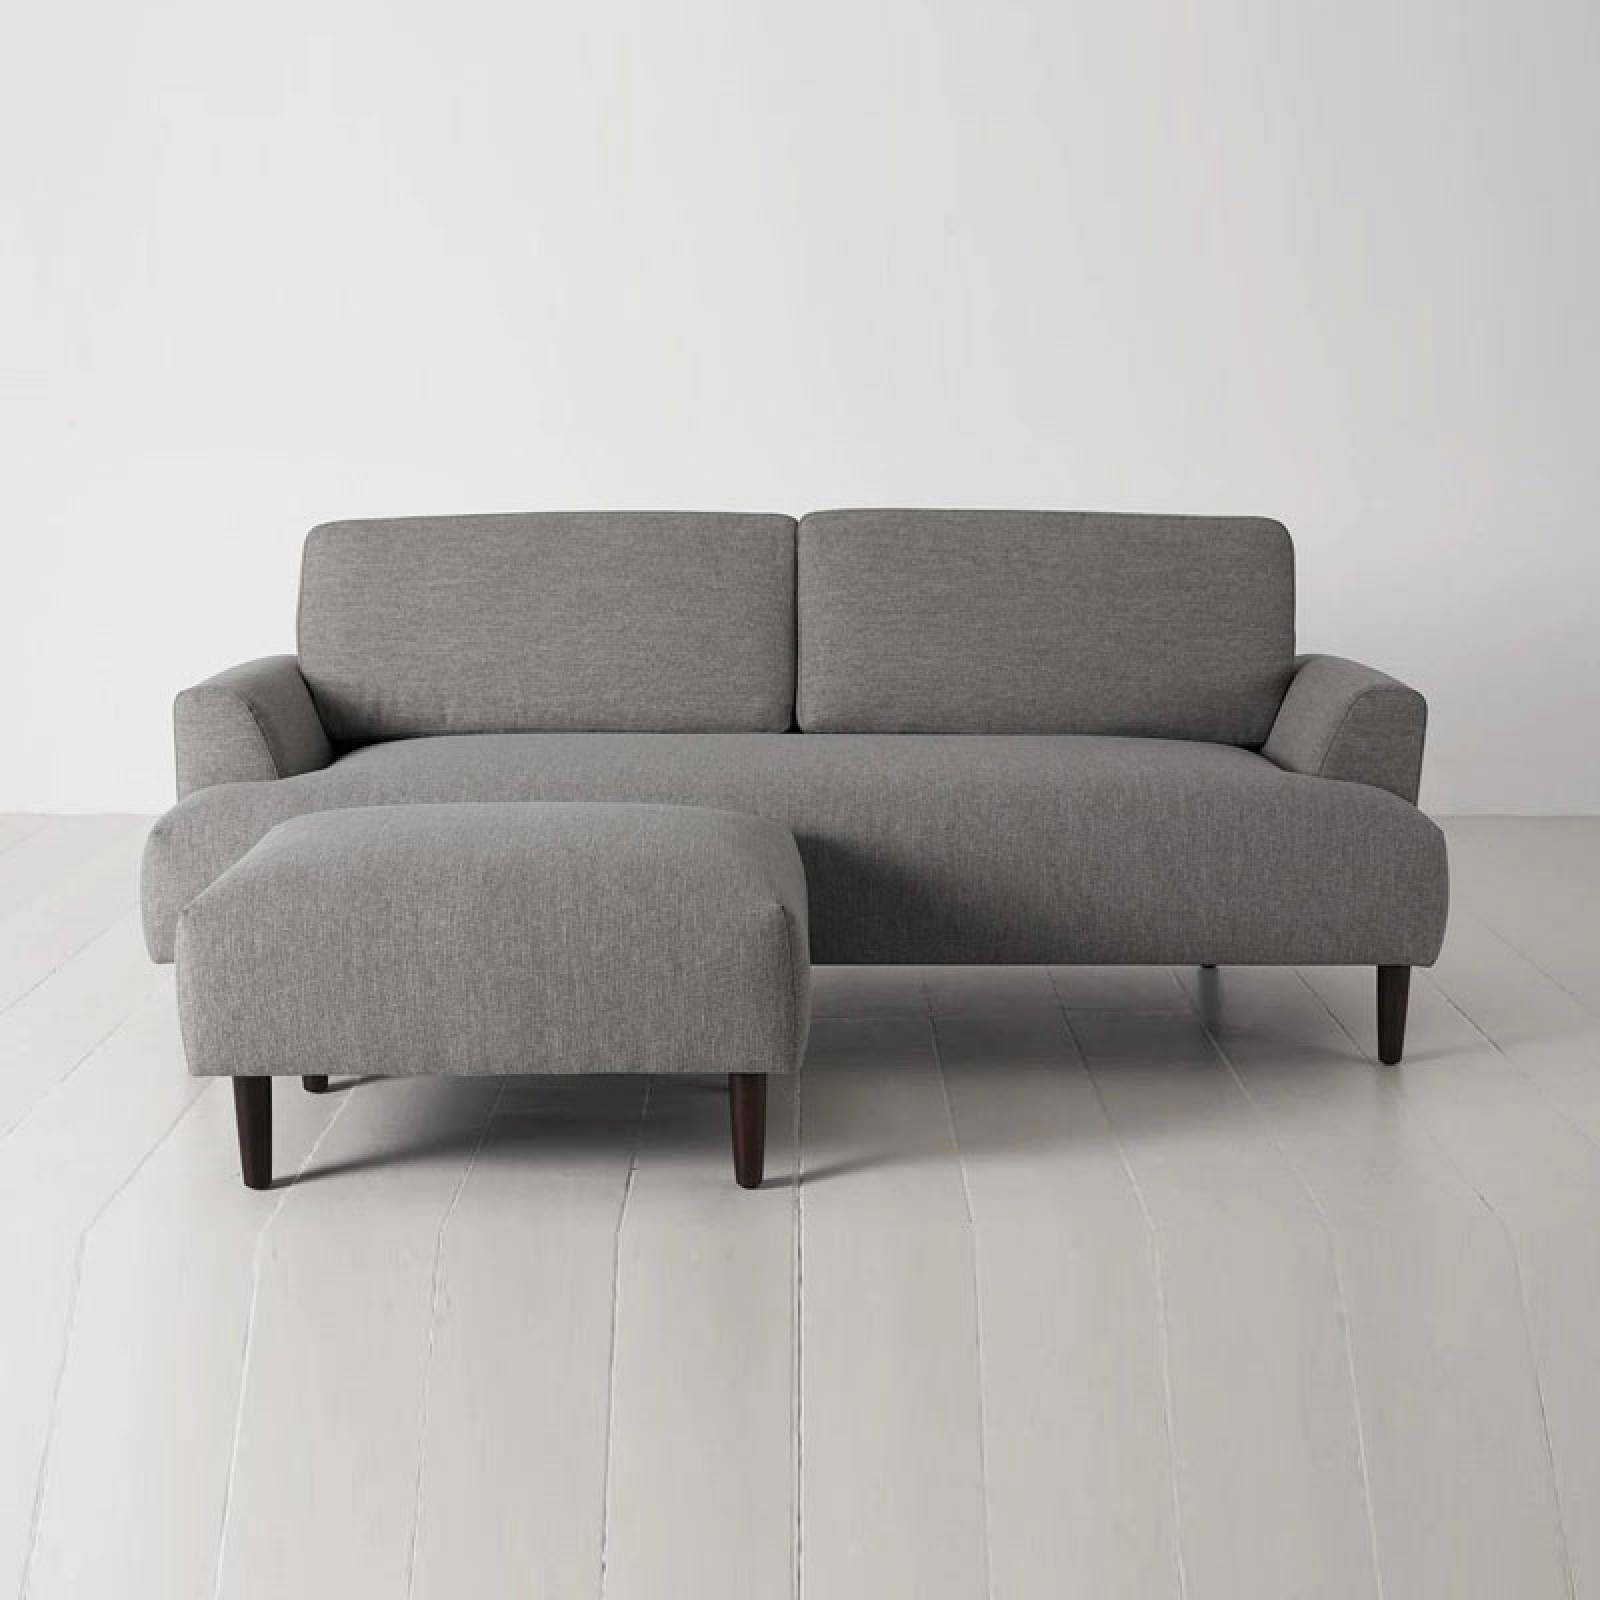 Swyft - Model 05 - 3 Seater Chaise Sofa - Left or Right thumbnails